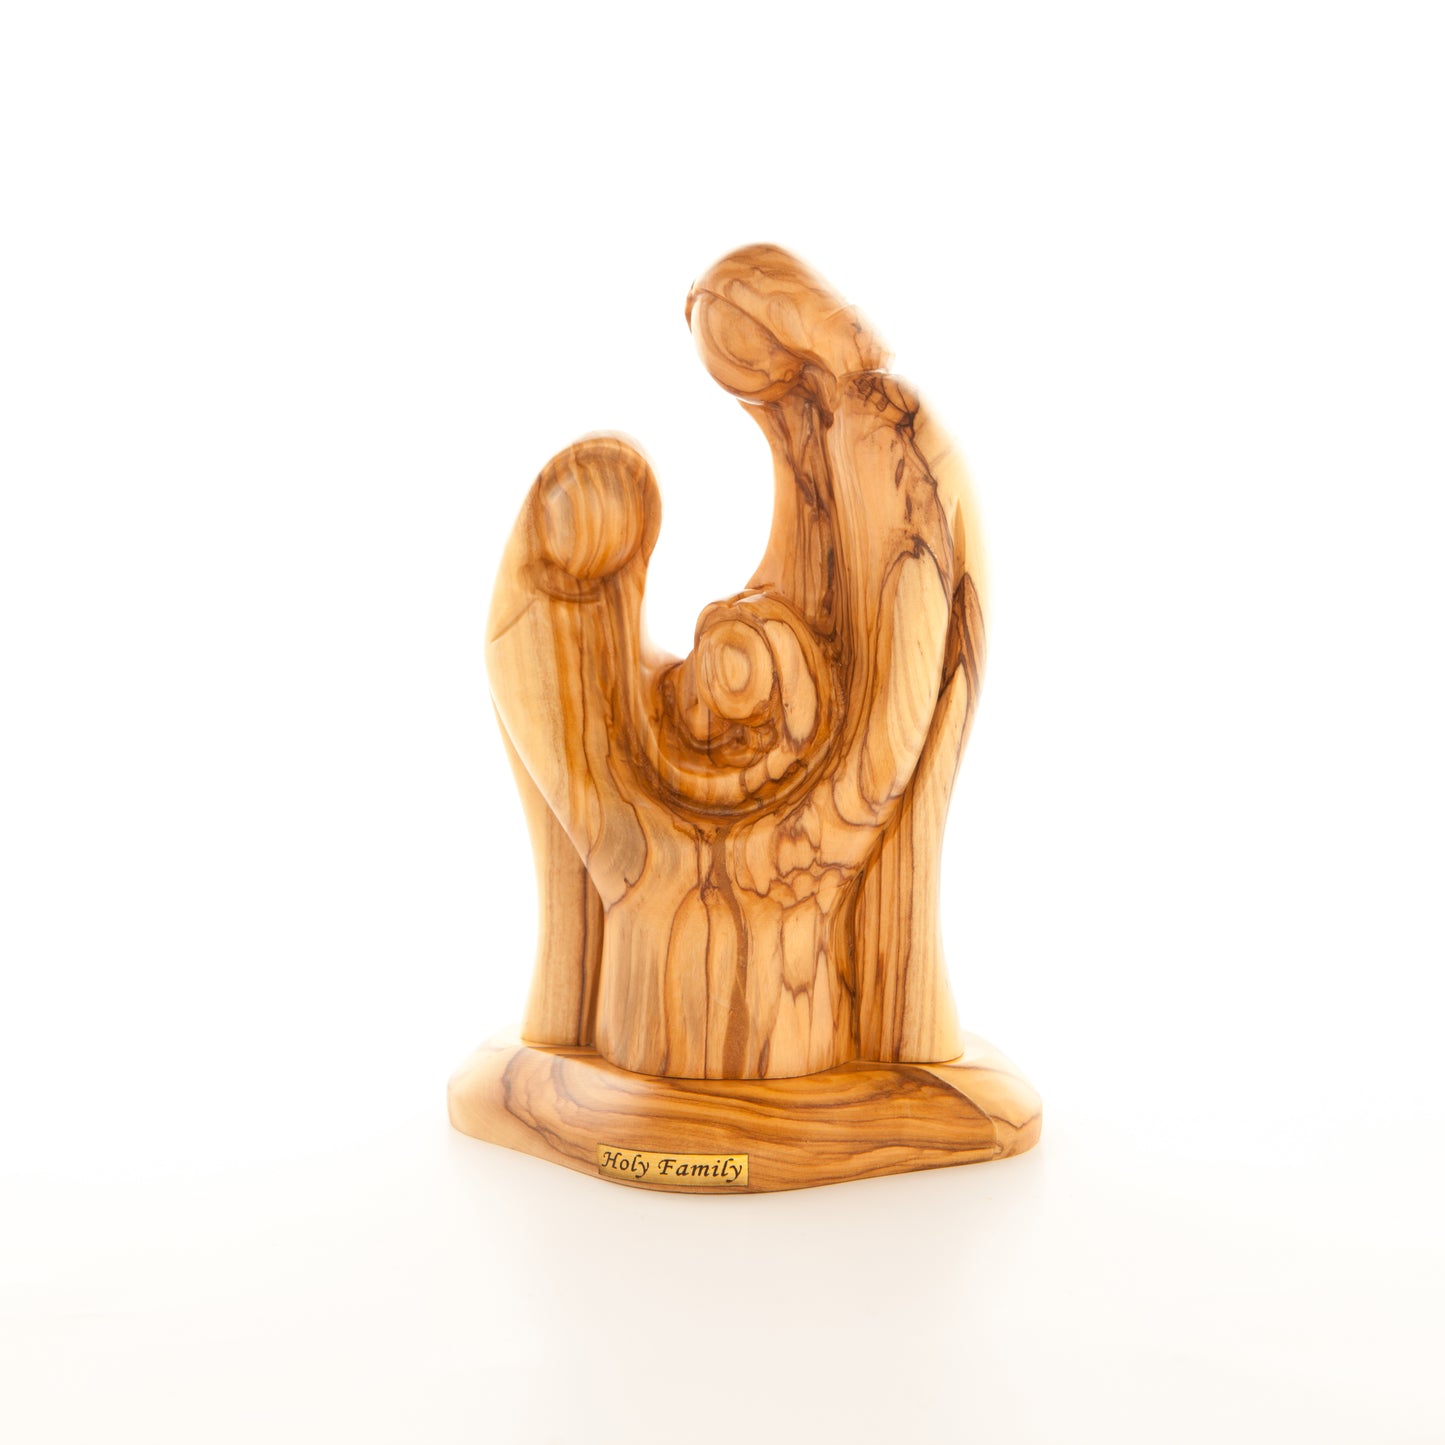 Holy Family Wooden Figurine, 6.7" (Abstract)